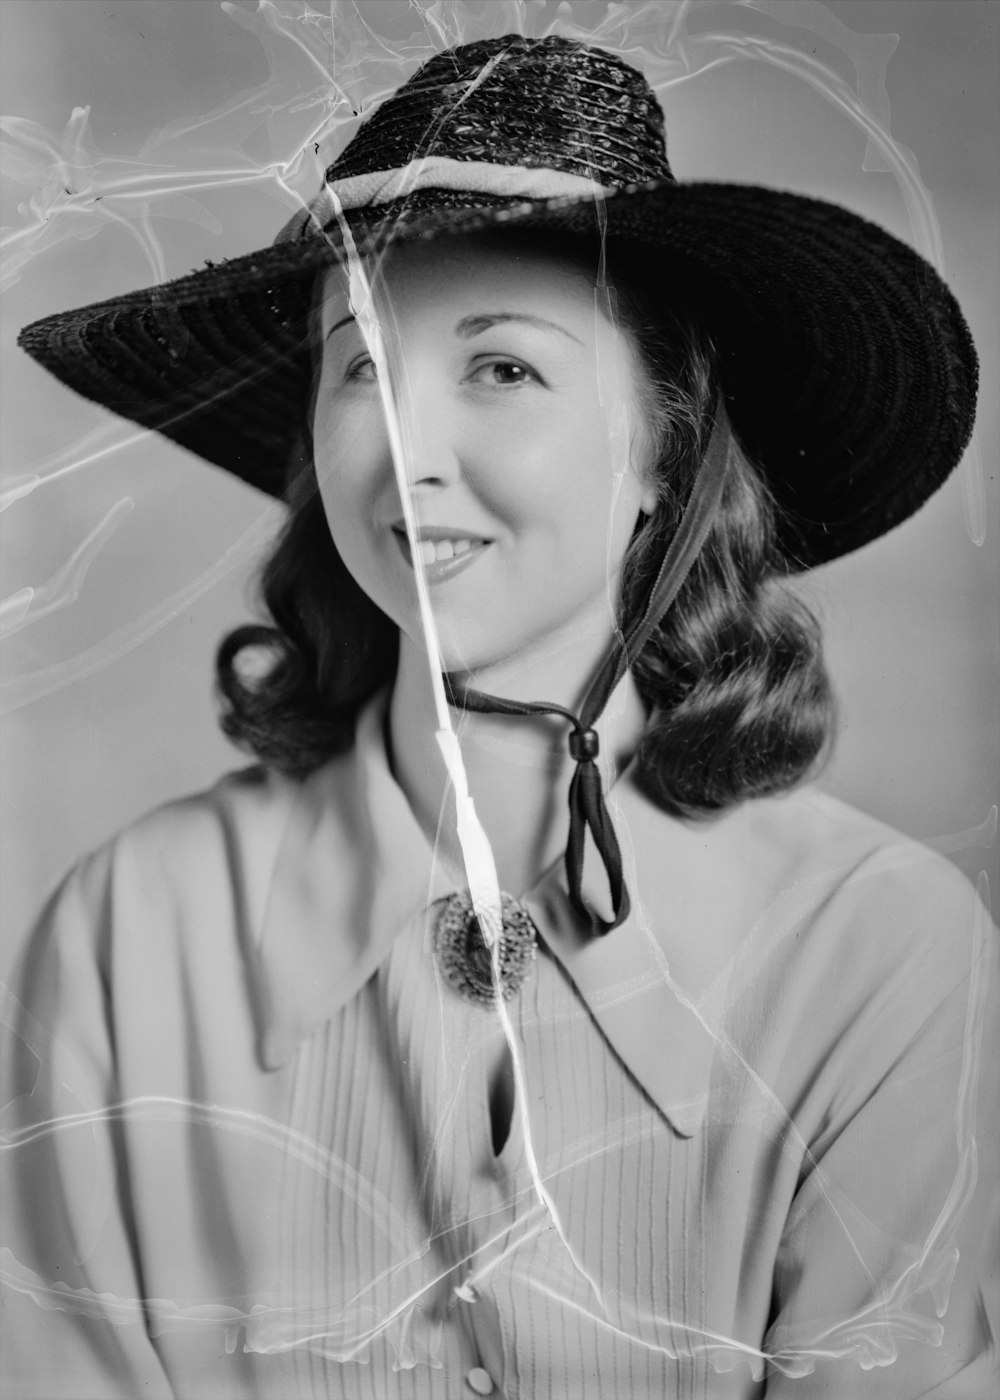 a woman wearing a hat and a tie